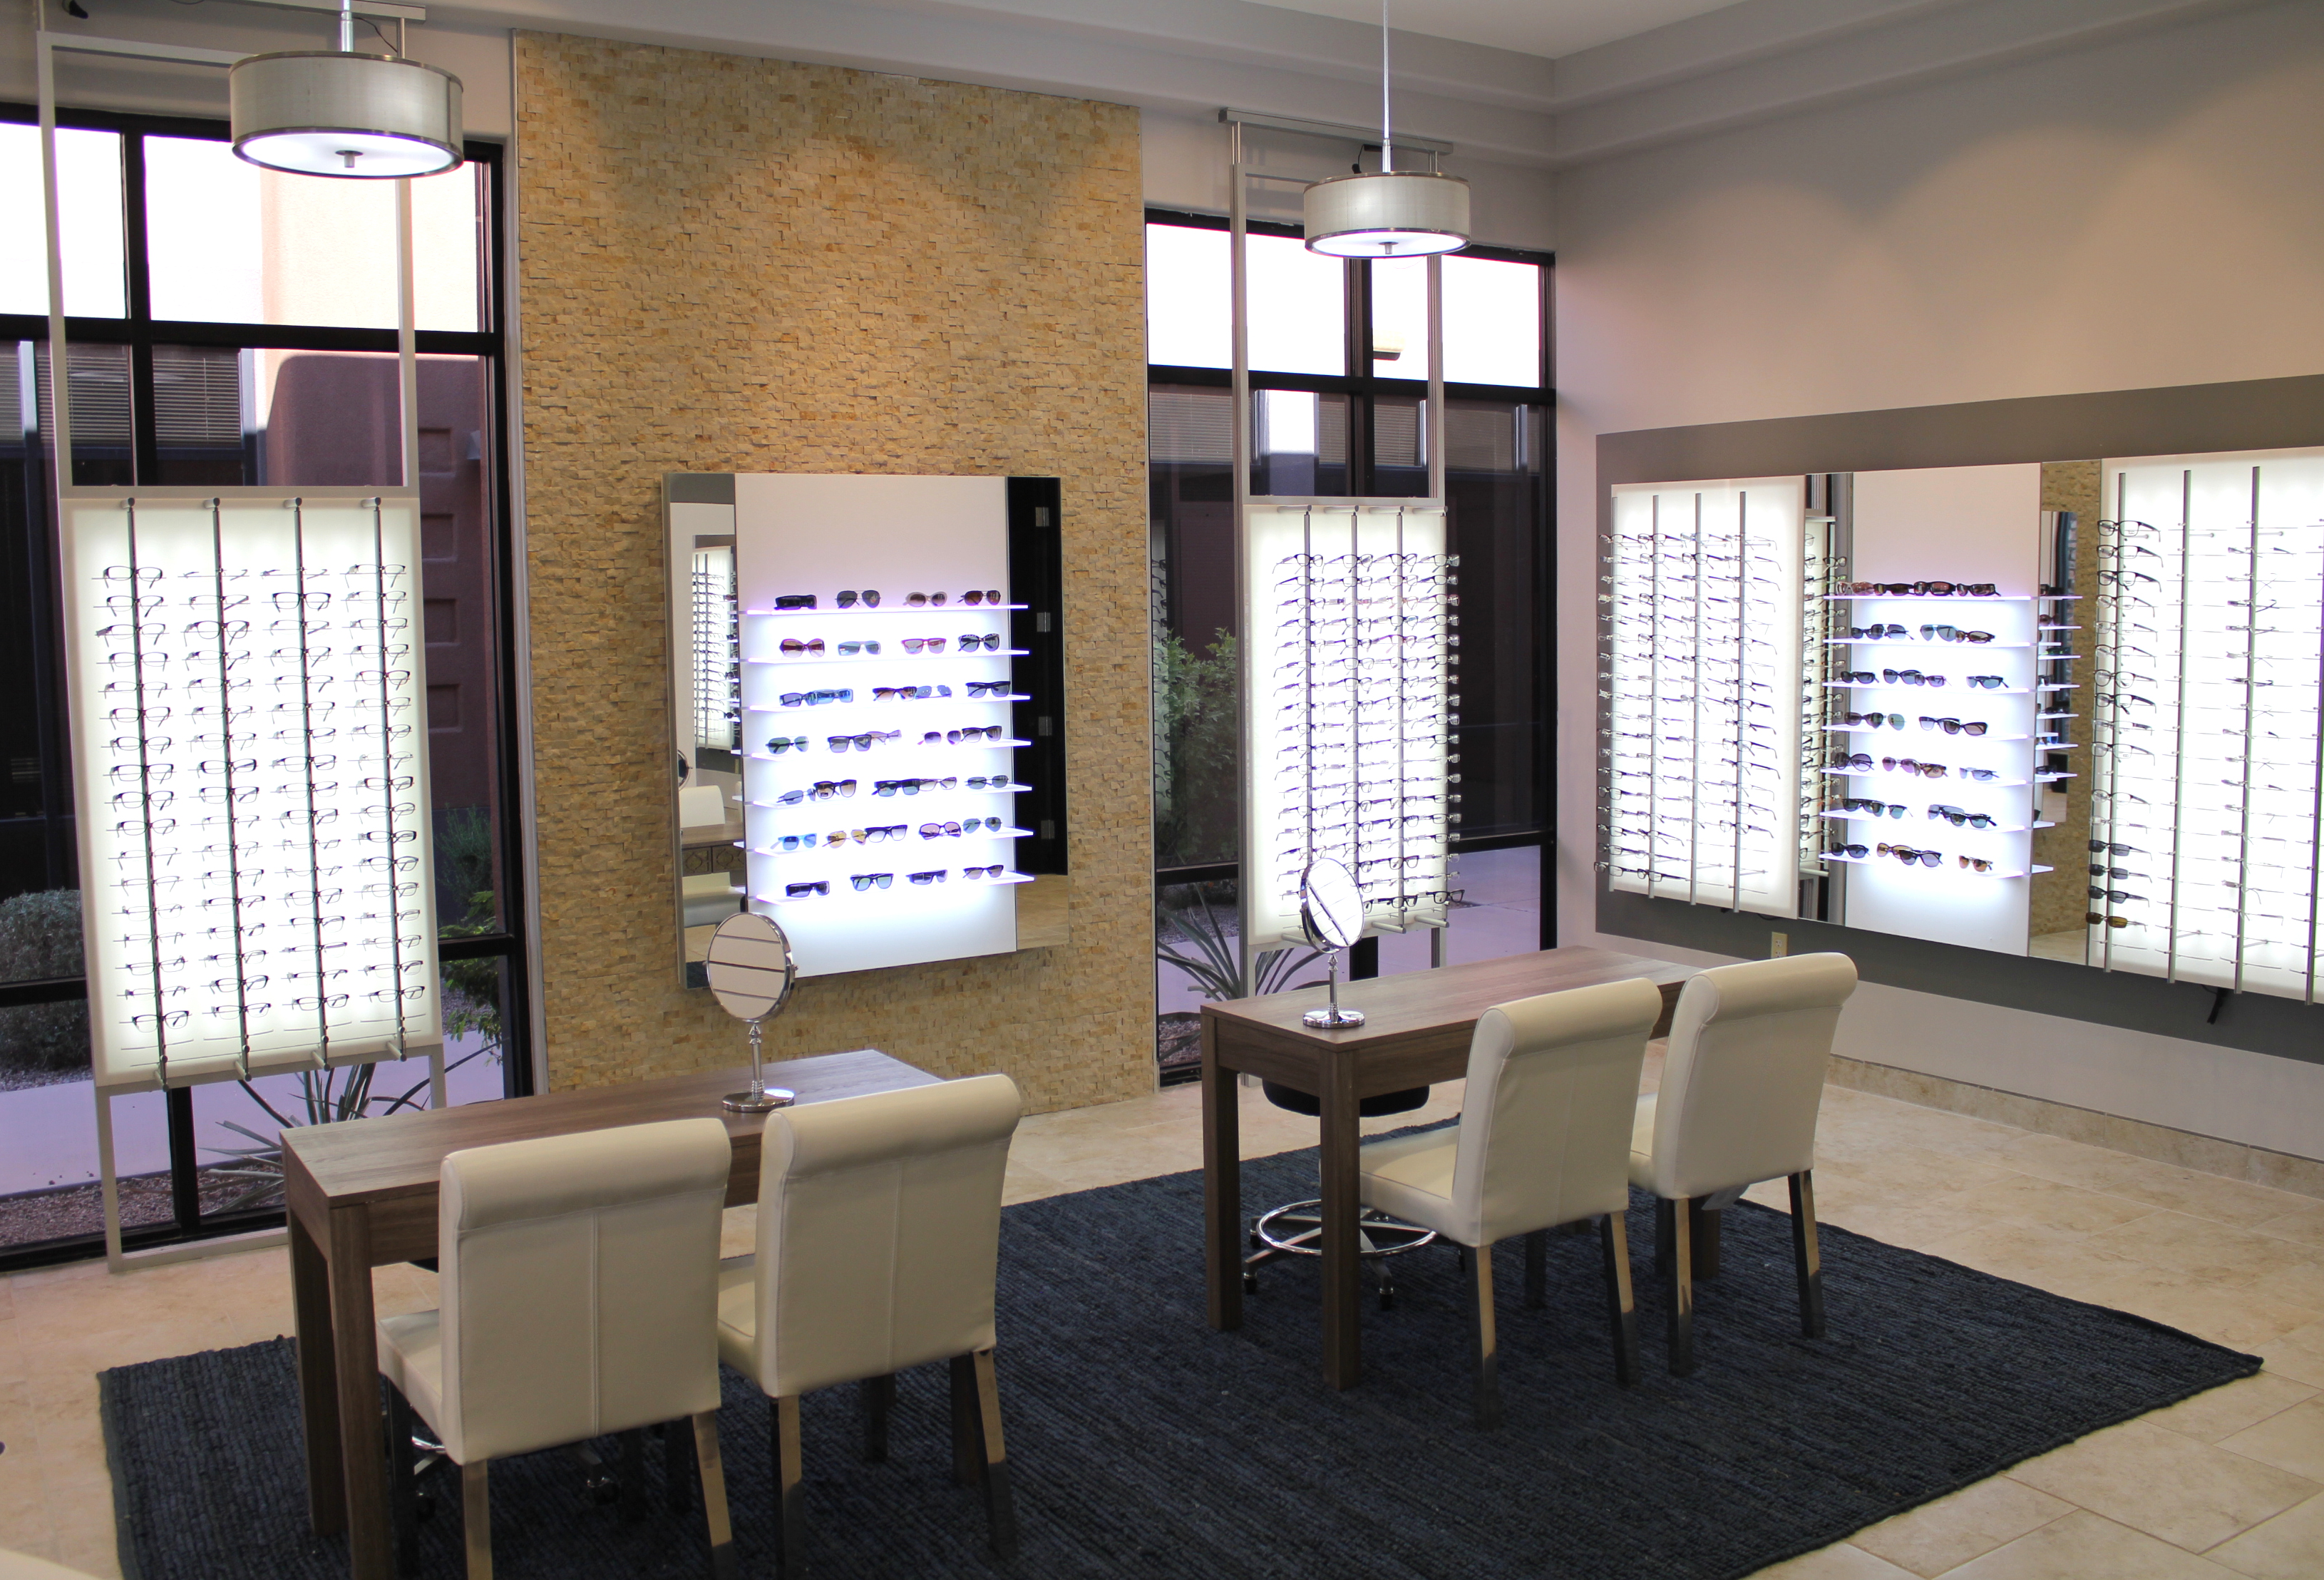 Complete Eye Care optical